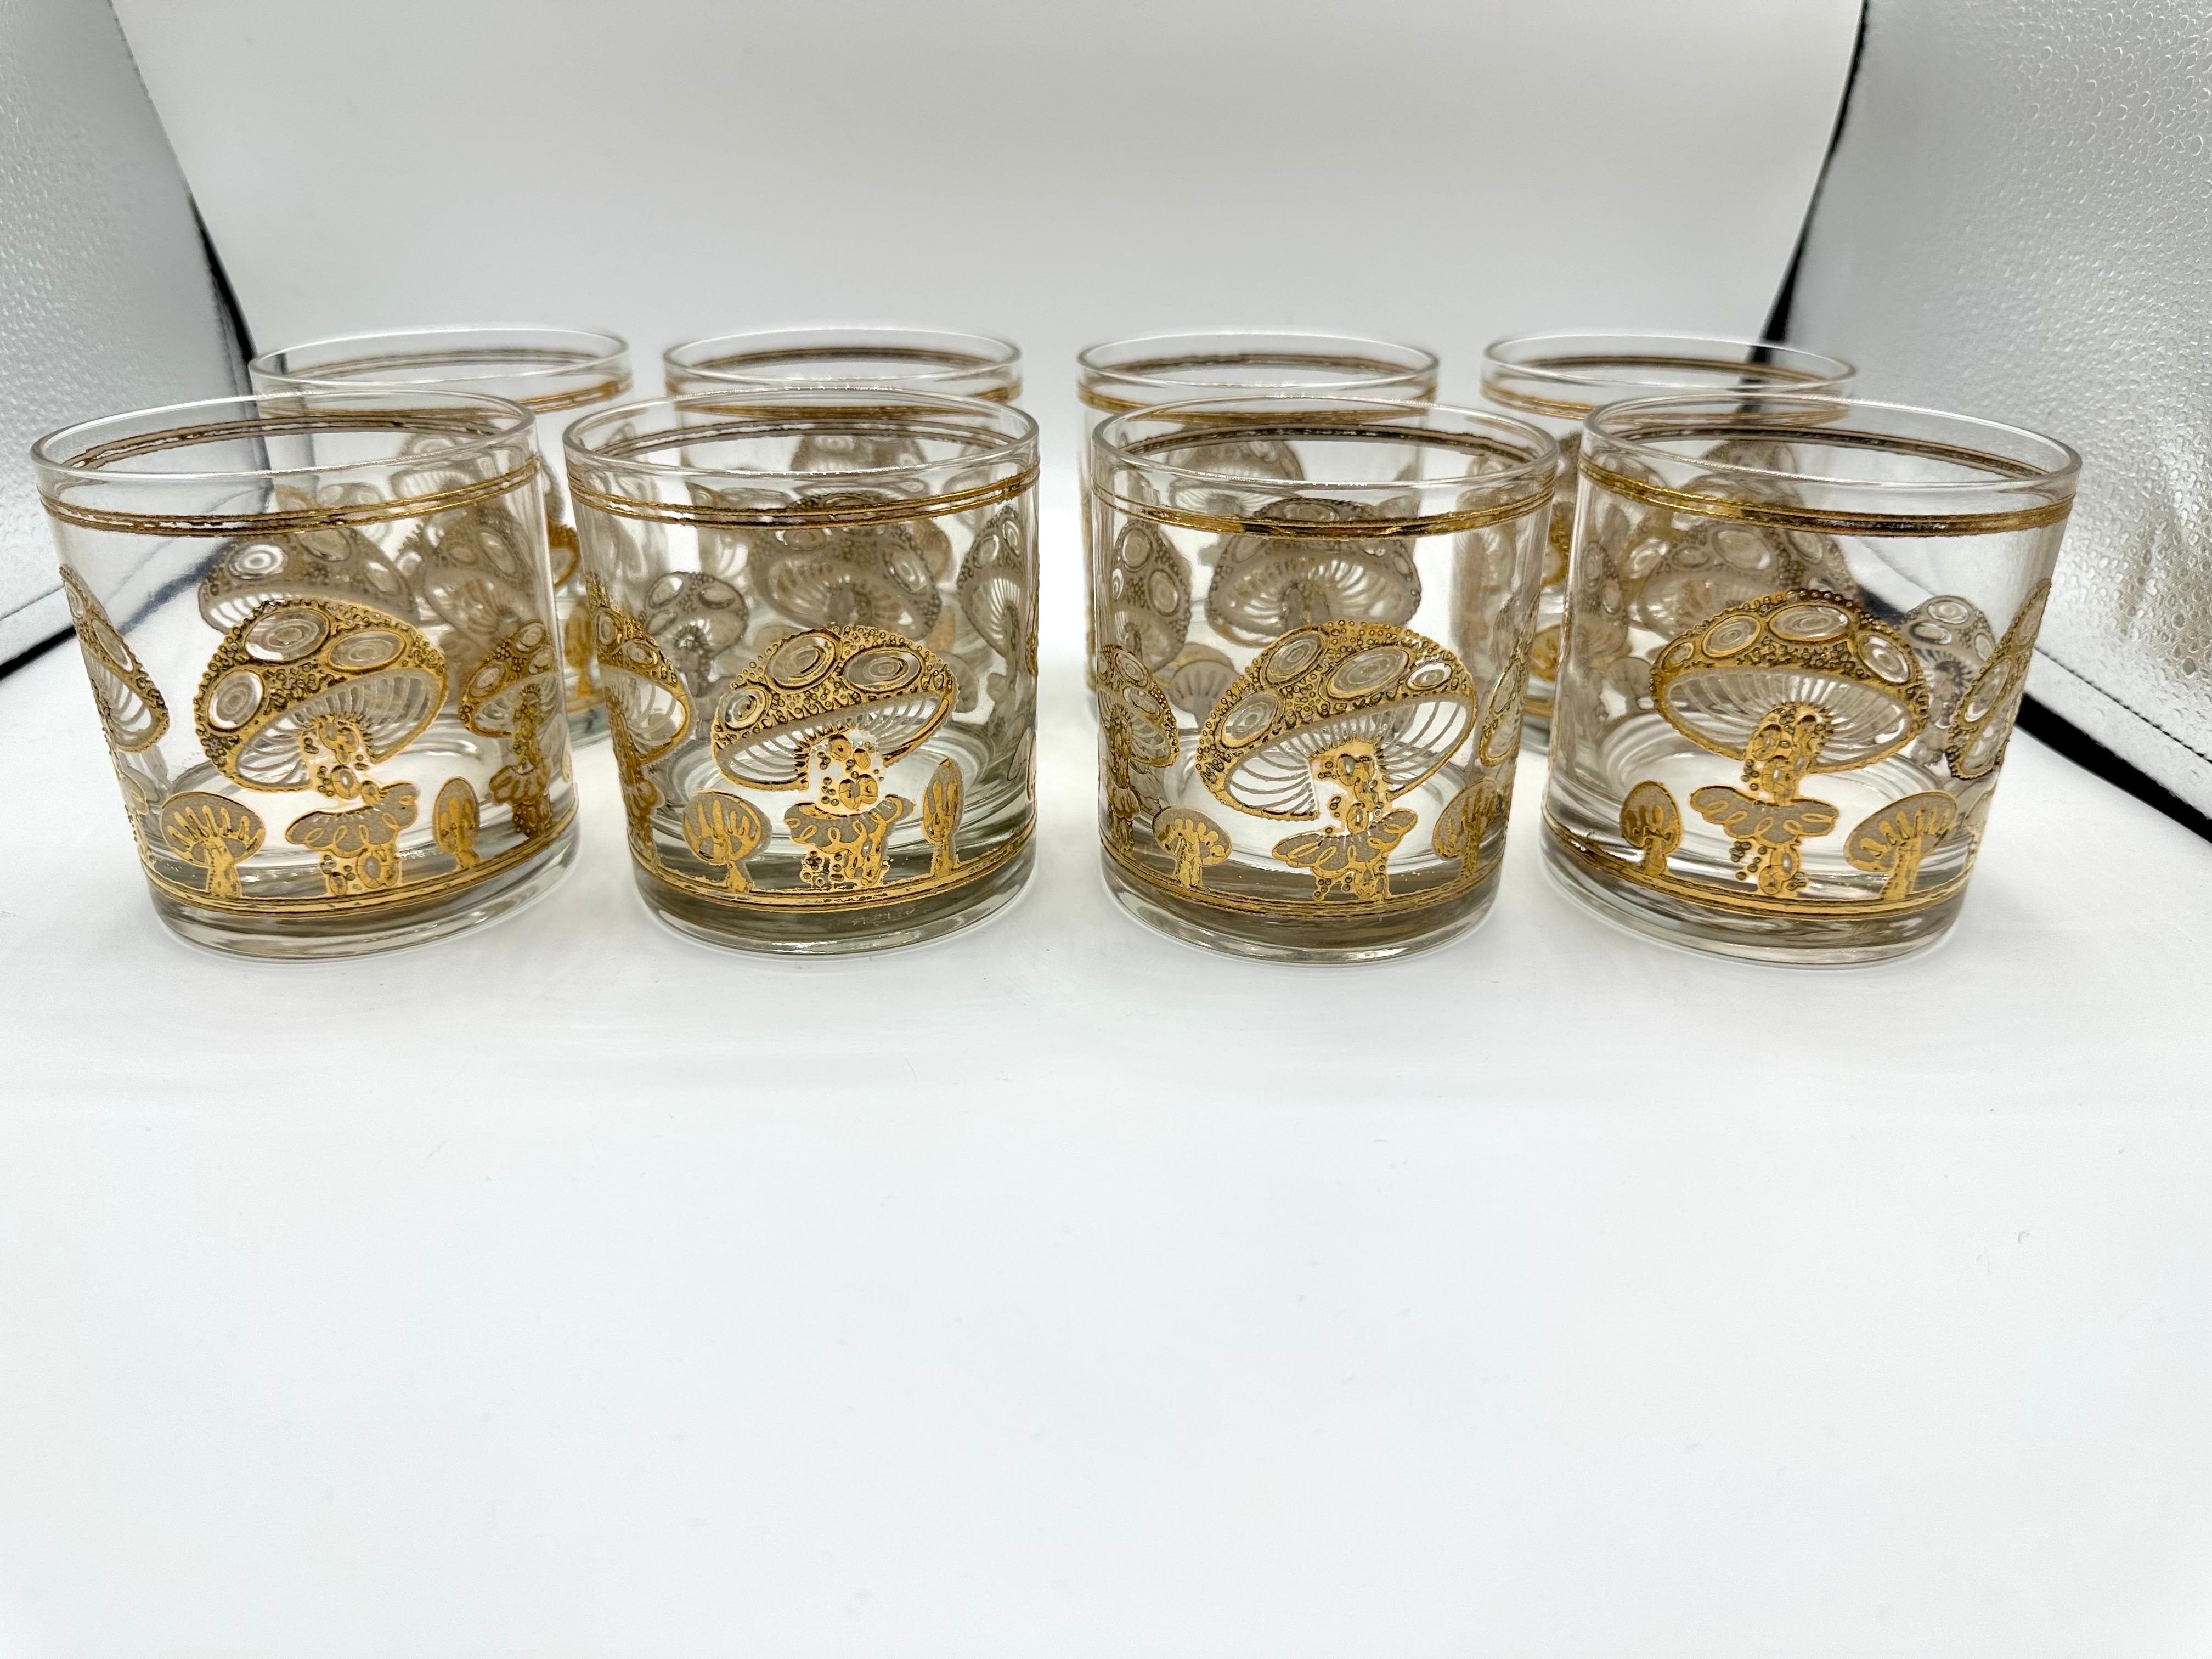 Elevate your drinking experience with this set of 8 vintage mushroom Culver old fashioned drinking glasses. The glasses feature a stunning Regency style with intricate gold detailing that adds a touch of elegance to any occasion. Crafted from